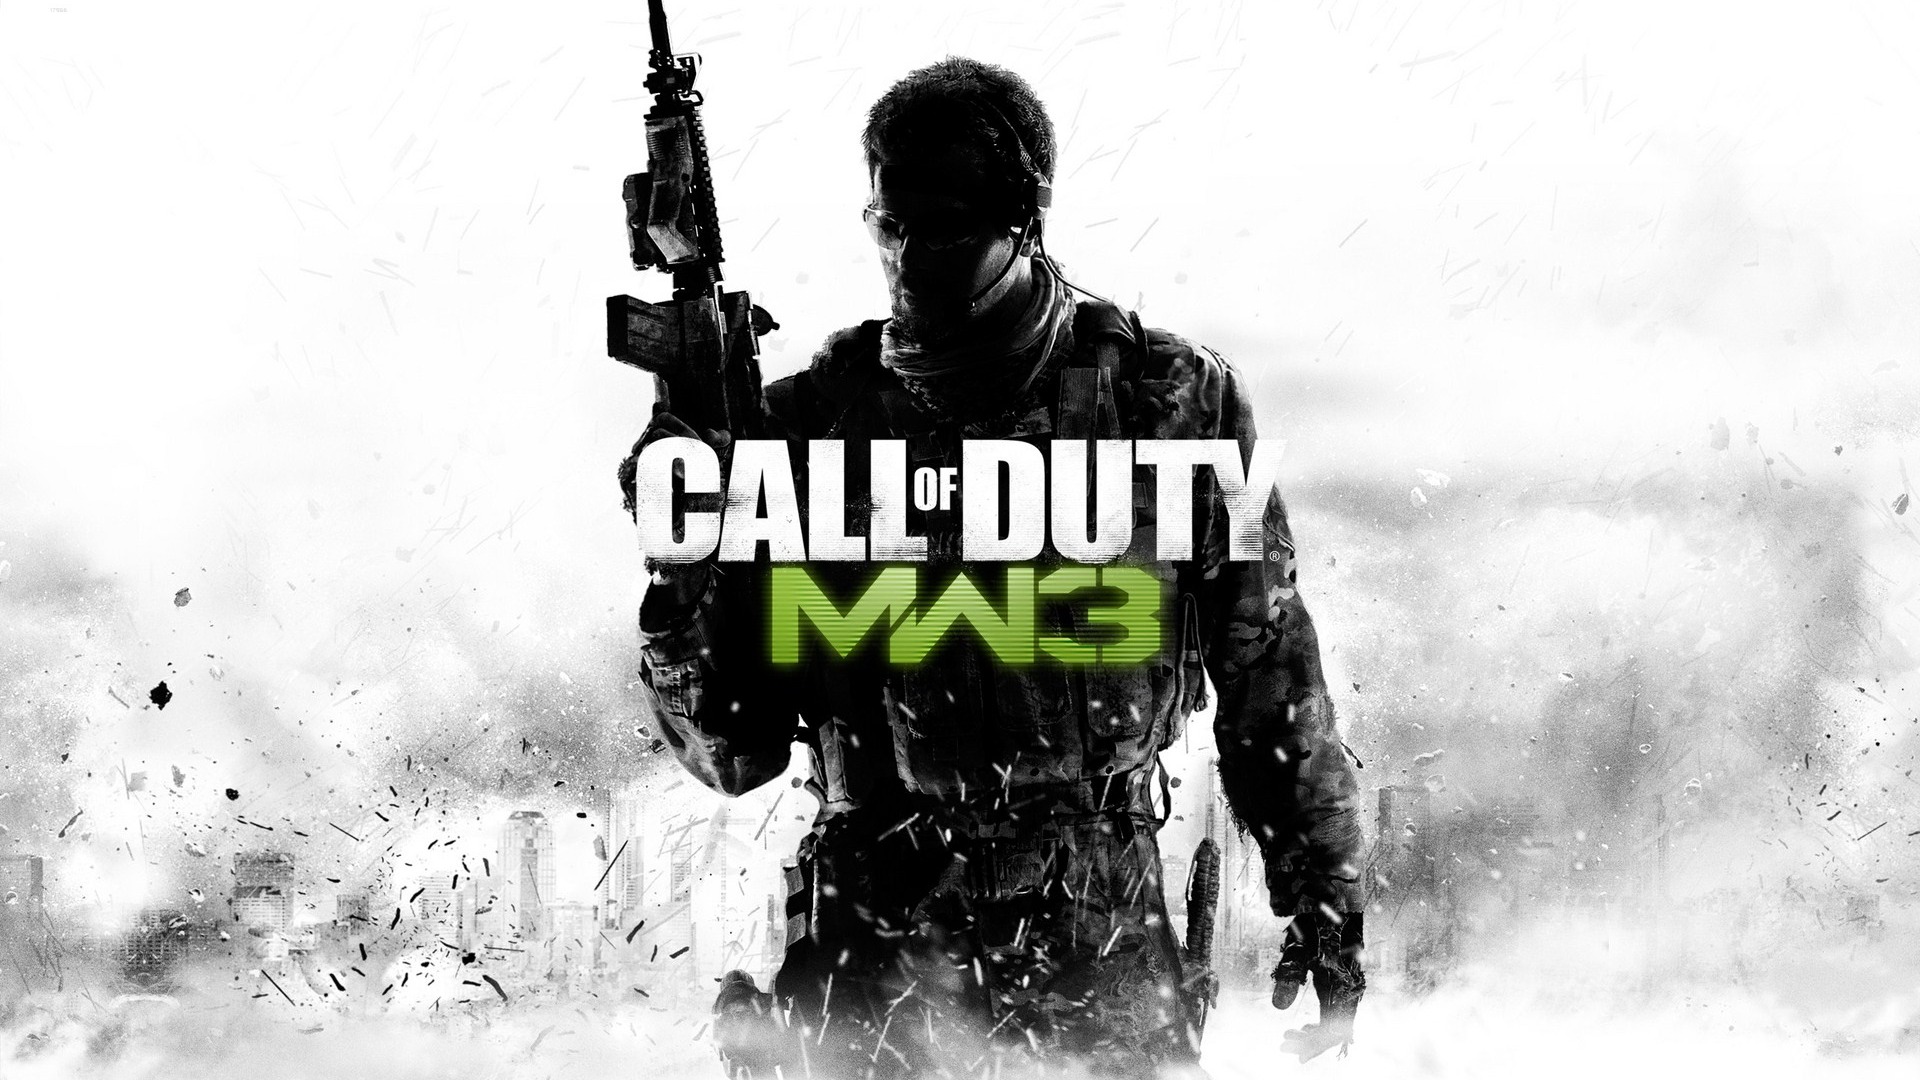 download mw3 remastered 2023